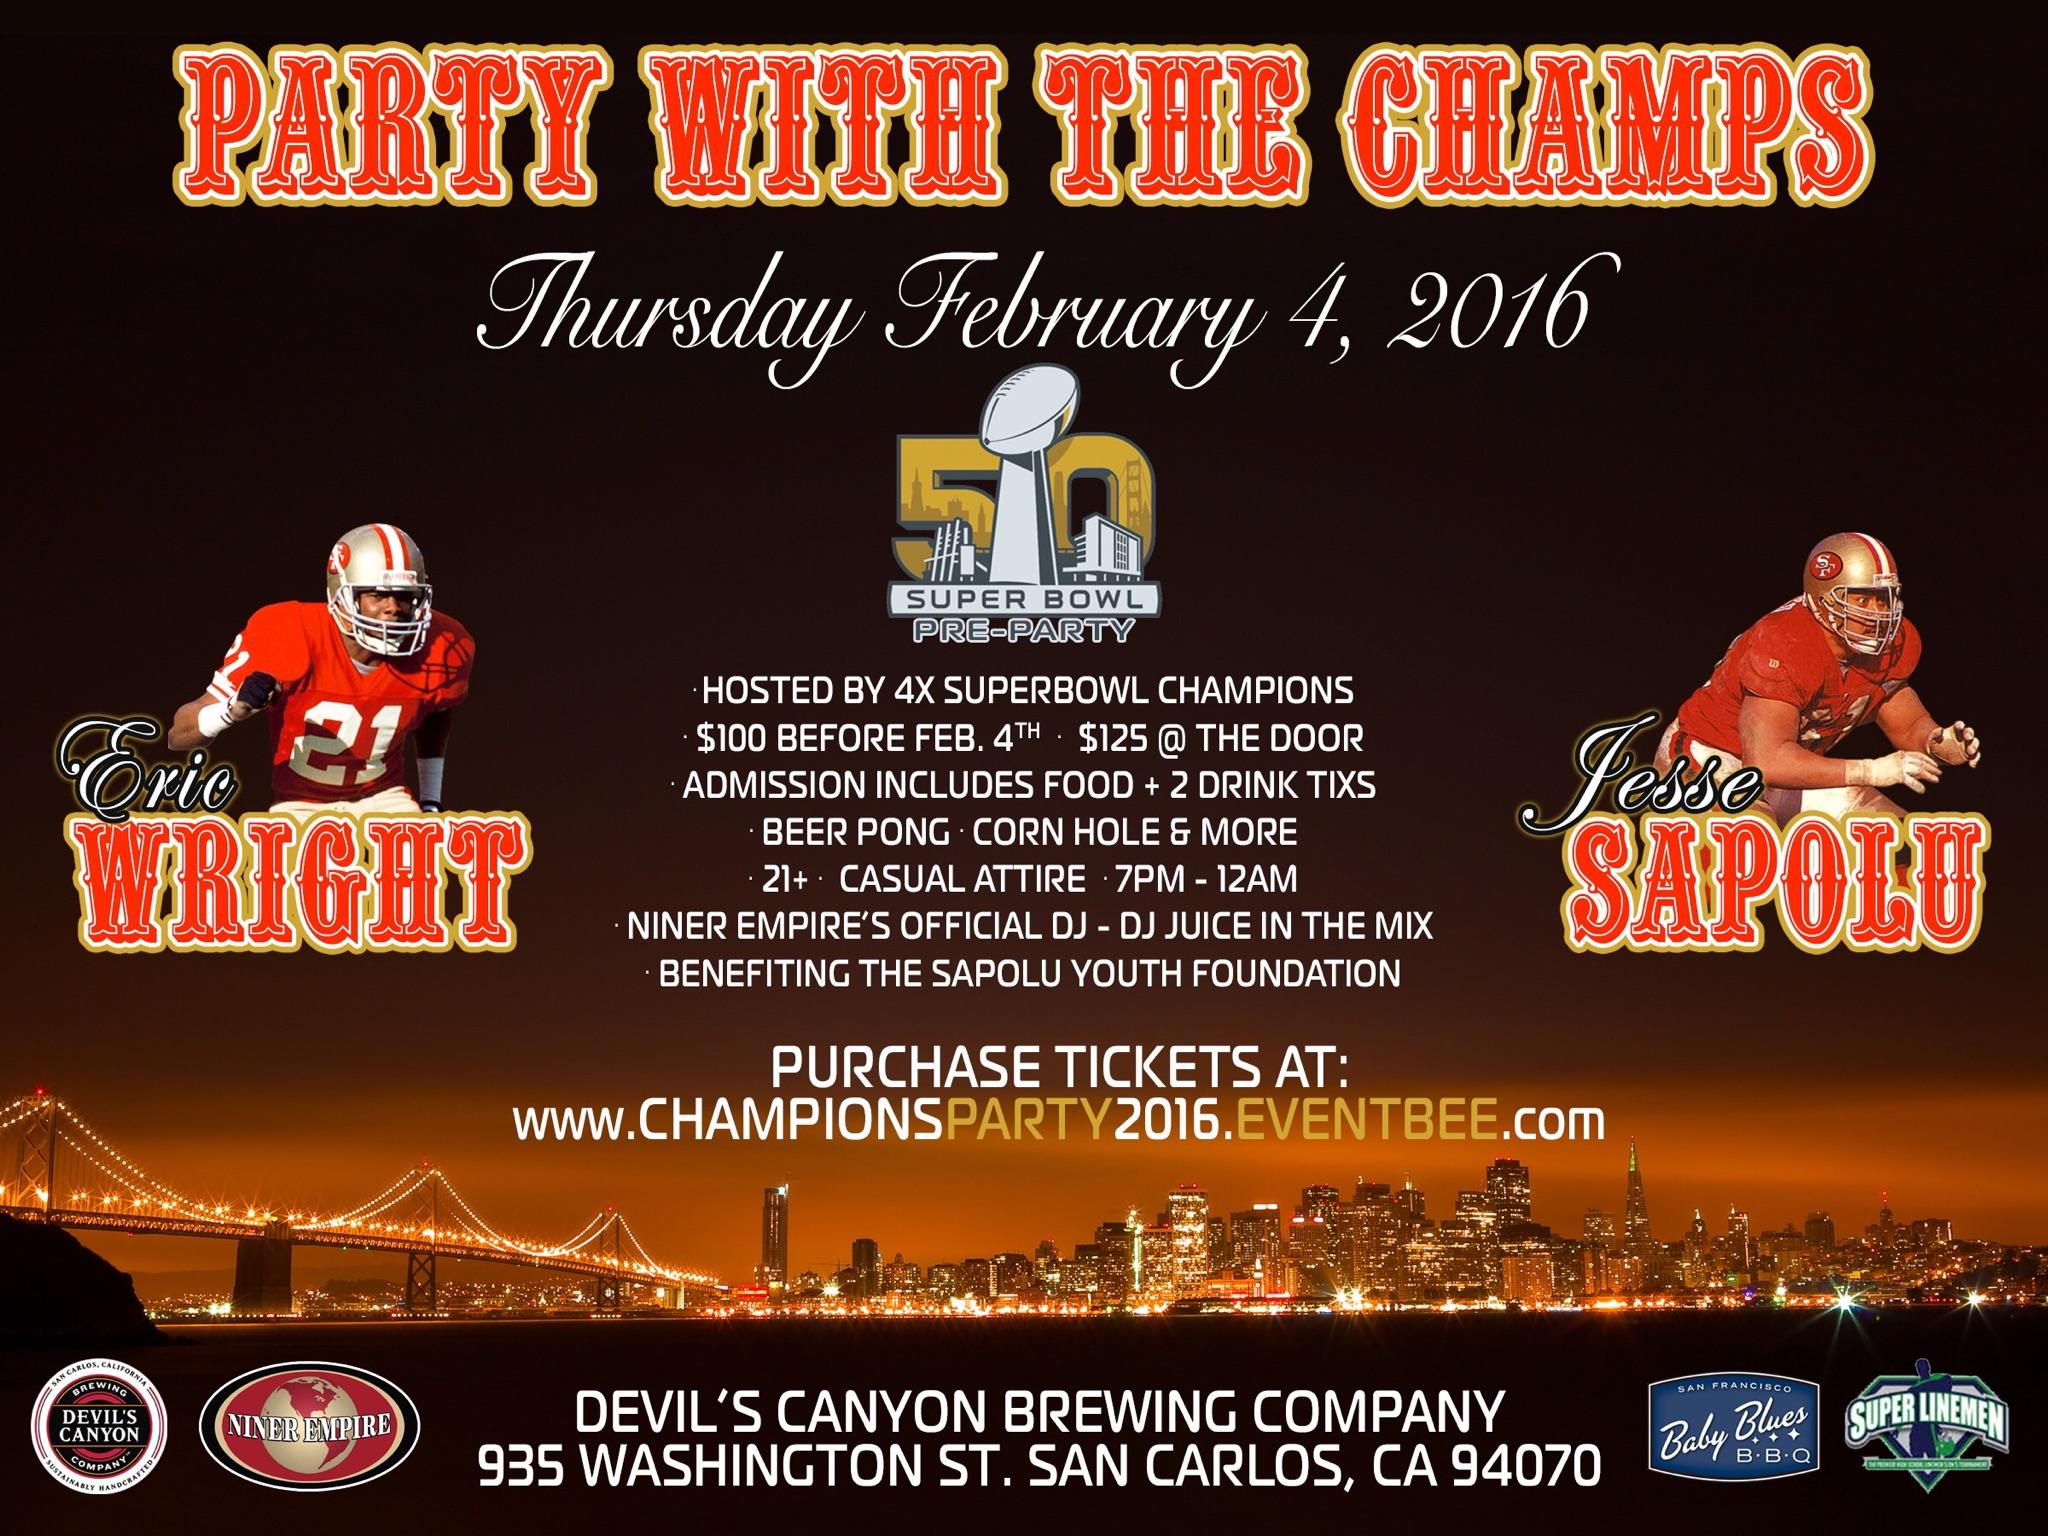 LAS VEGAS SUPER BOWL PARTIES AND TAILGATES 2024 Party With The Champs